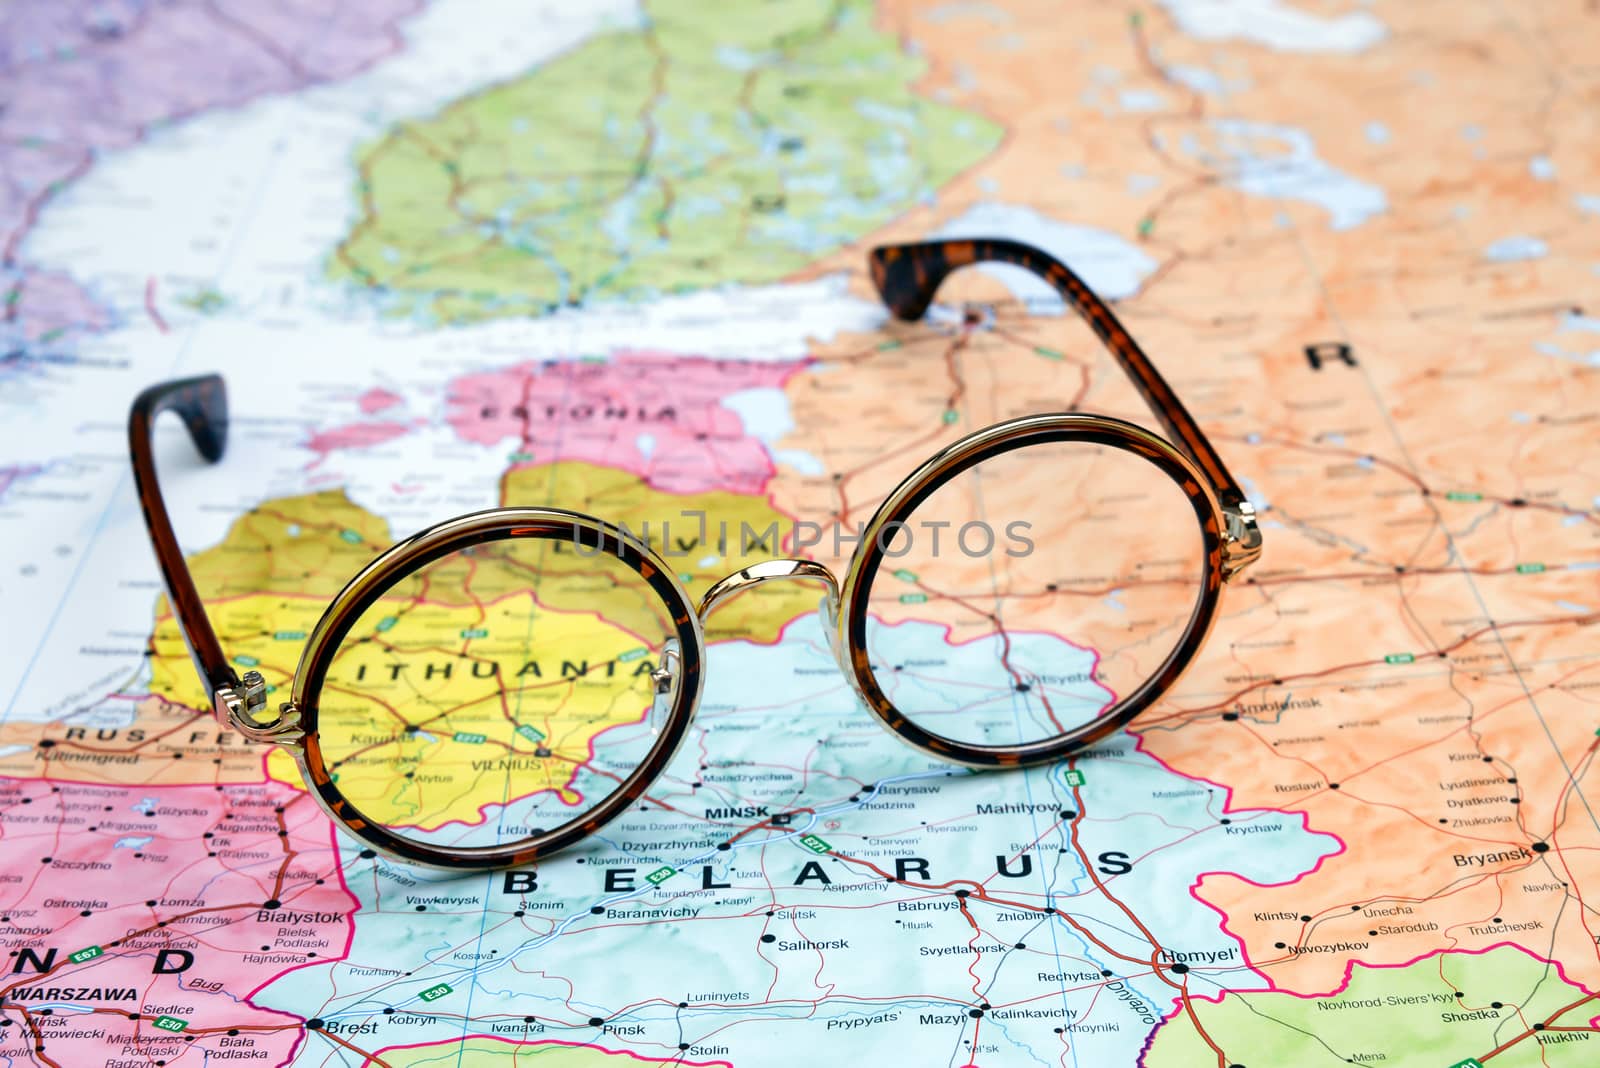 Photo of glasses on a map of europe. Focus on Lithuania. May be used as illustration for traveling theme.